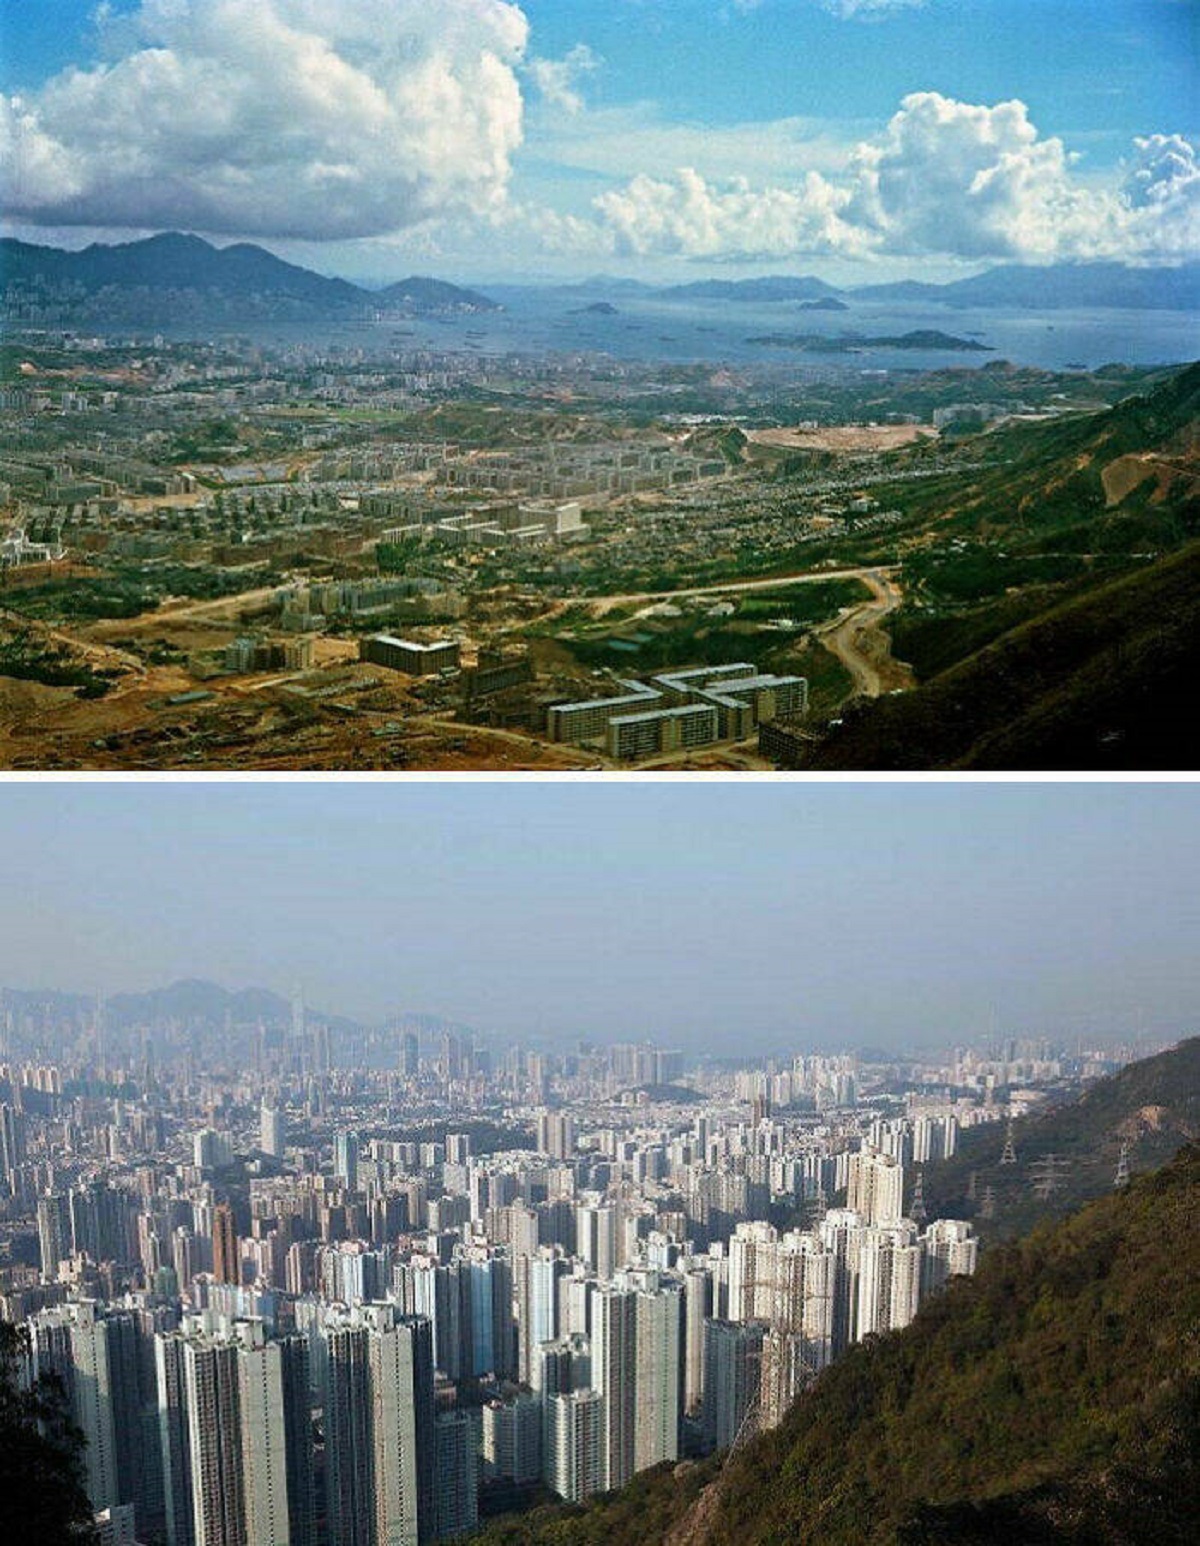 "The Same View Of Hong Kong In 1964 And 2016"